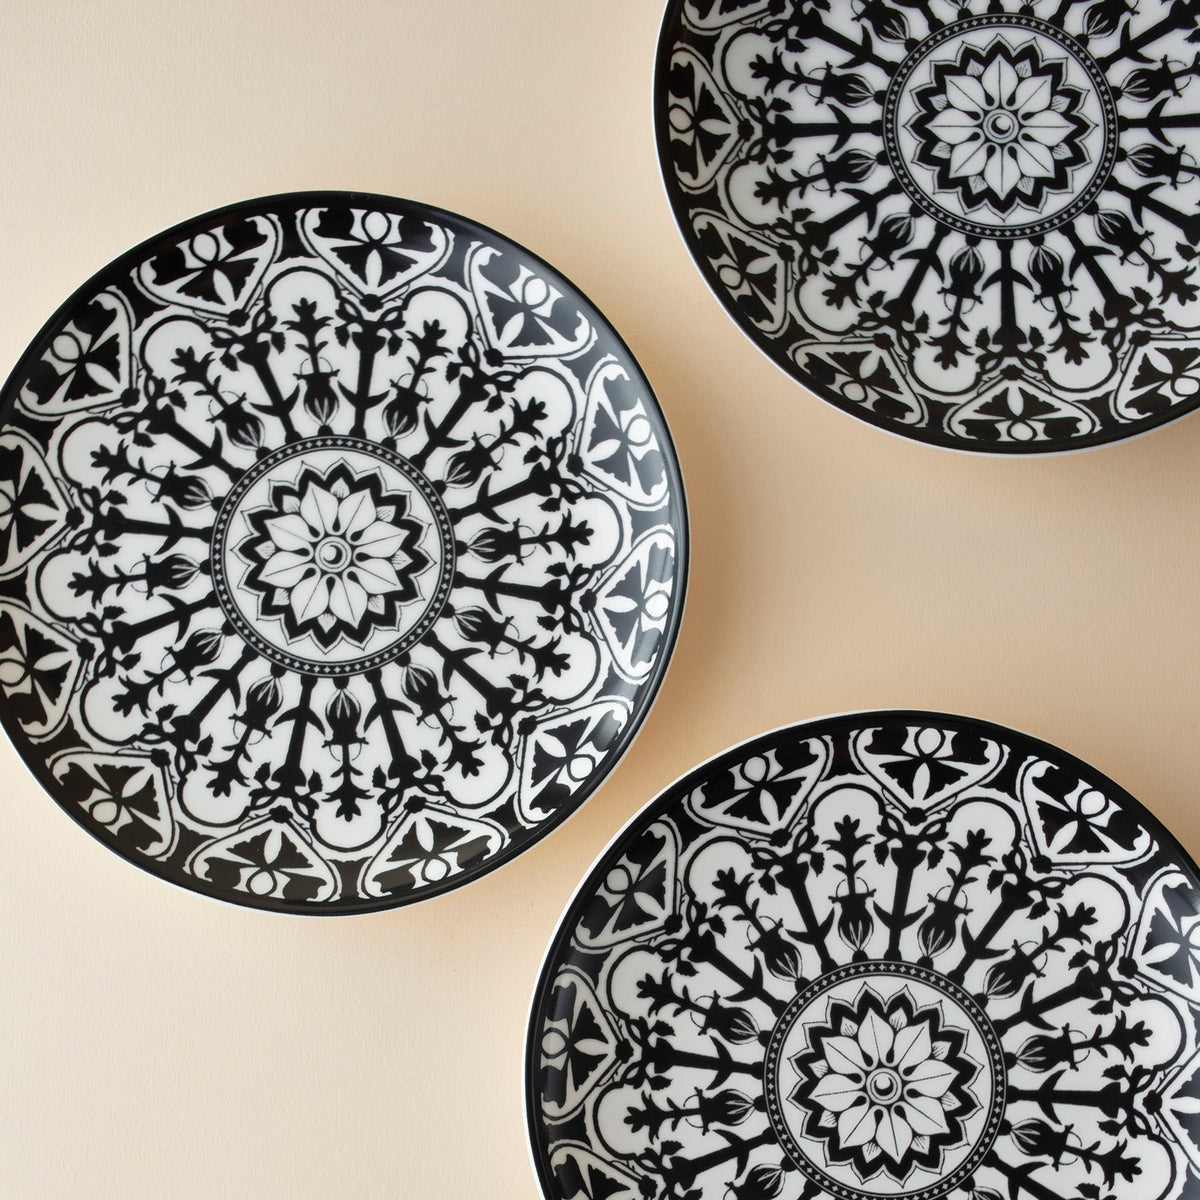 Three Casablanca Small Plates by Caskata Artisanal Home, with intricate, symmetrical geometric patterns, are arranged against a light beige background.